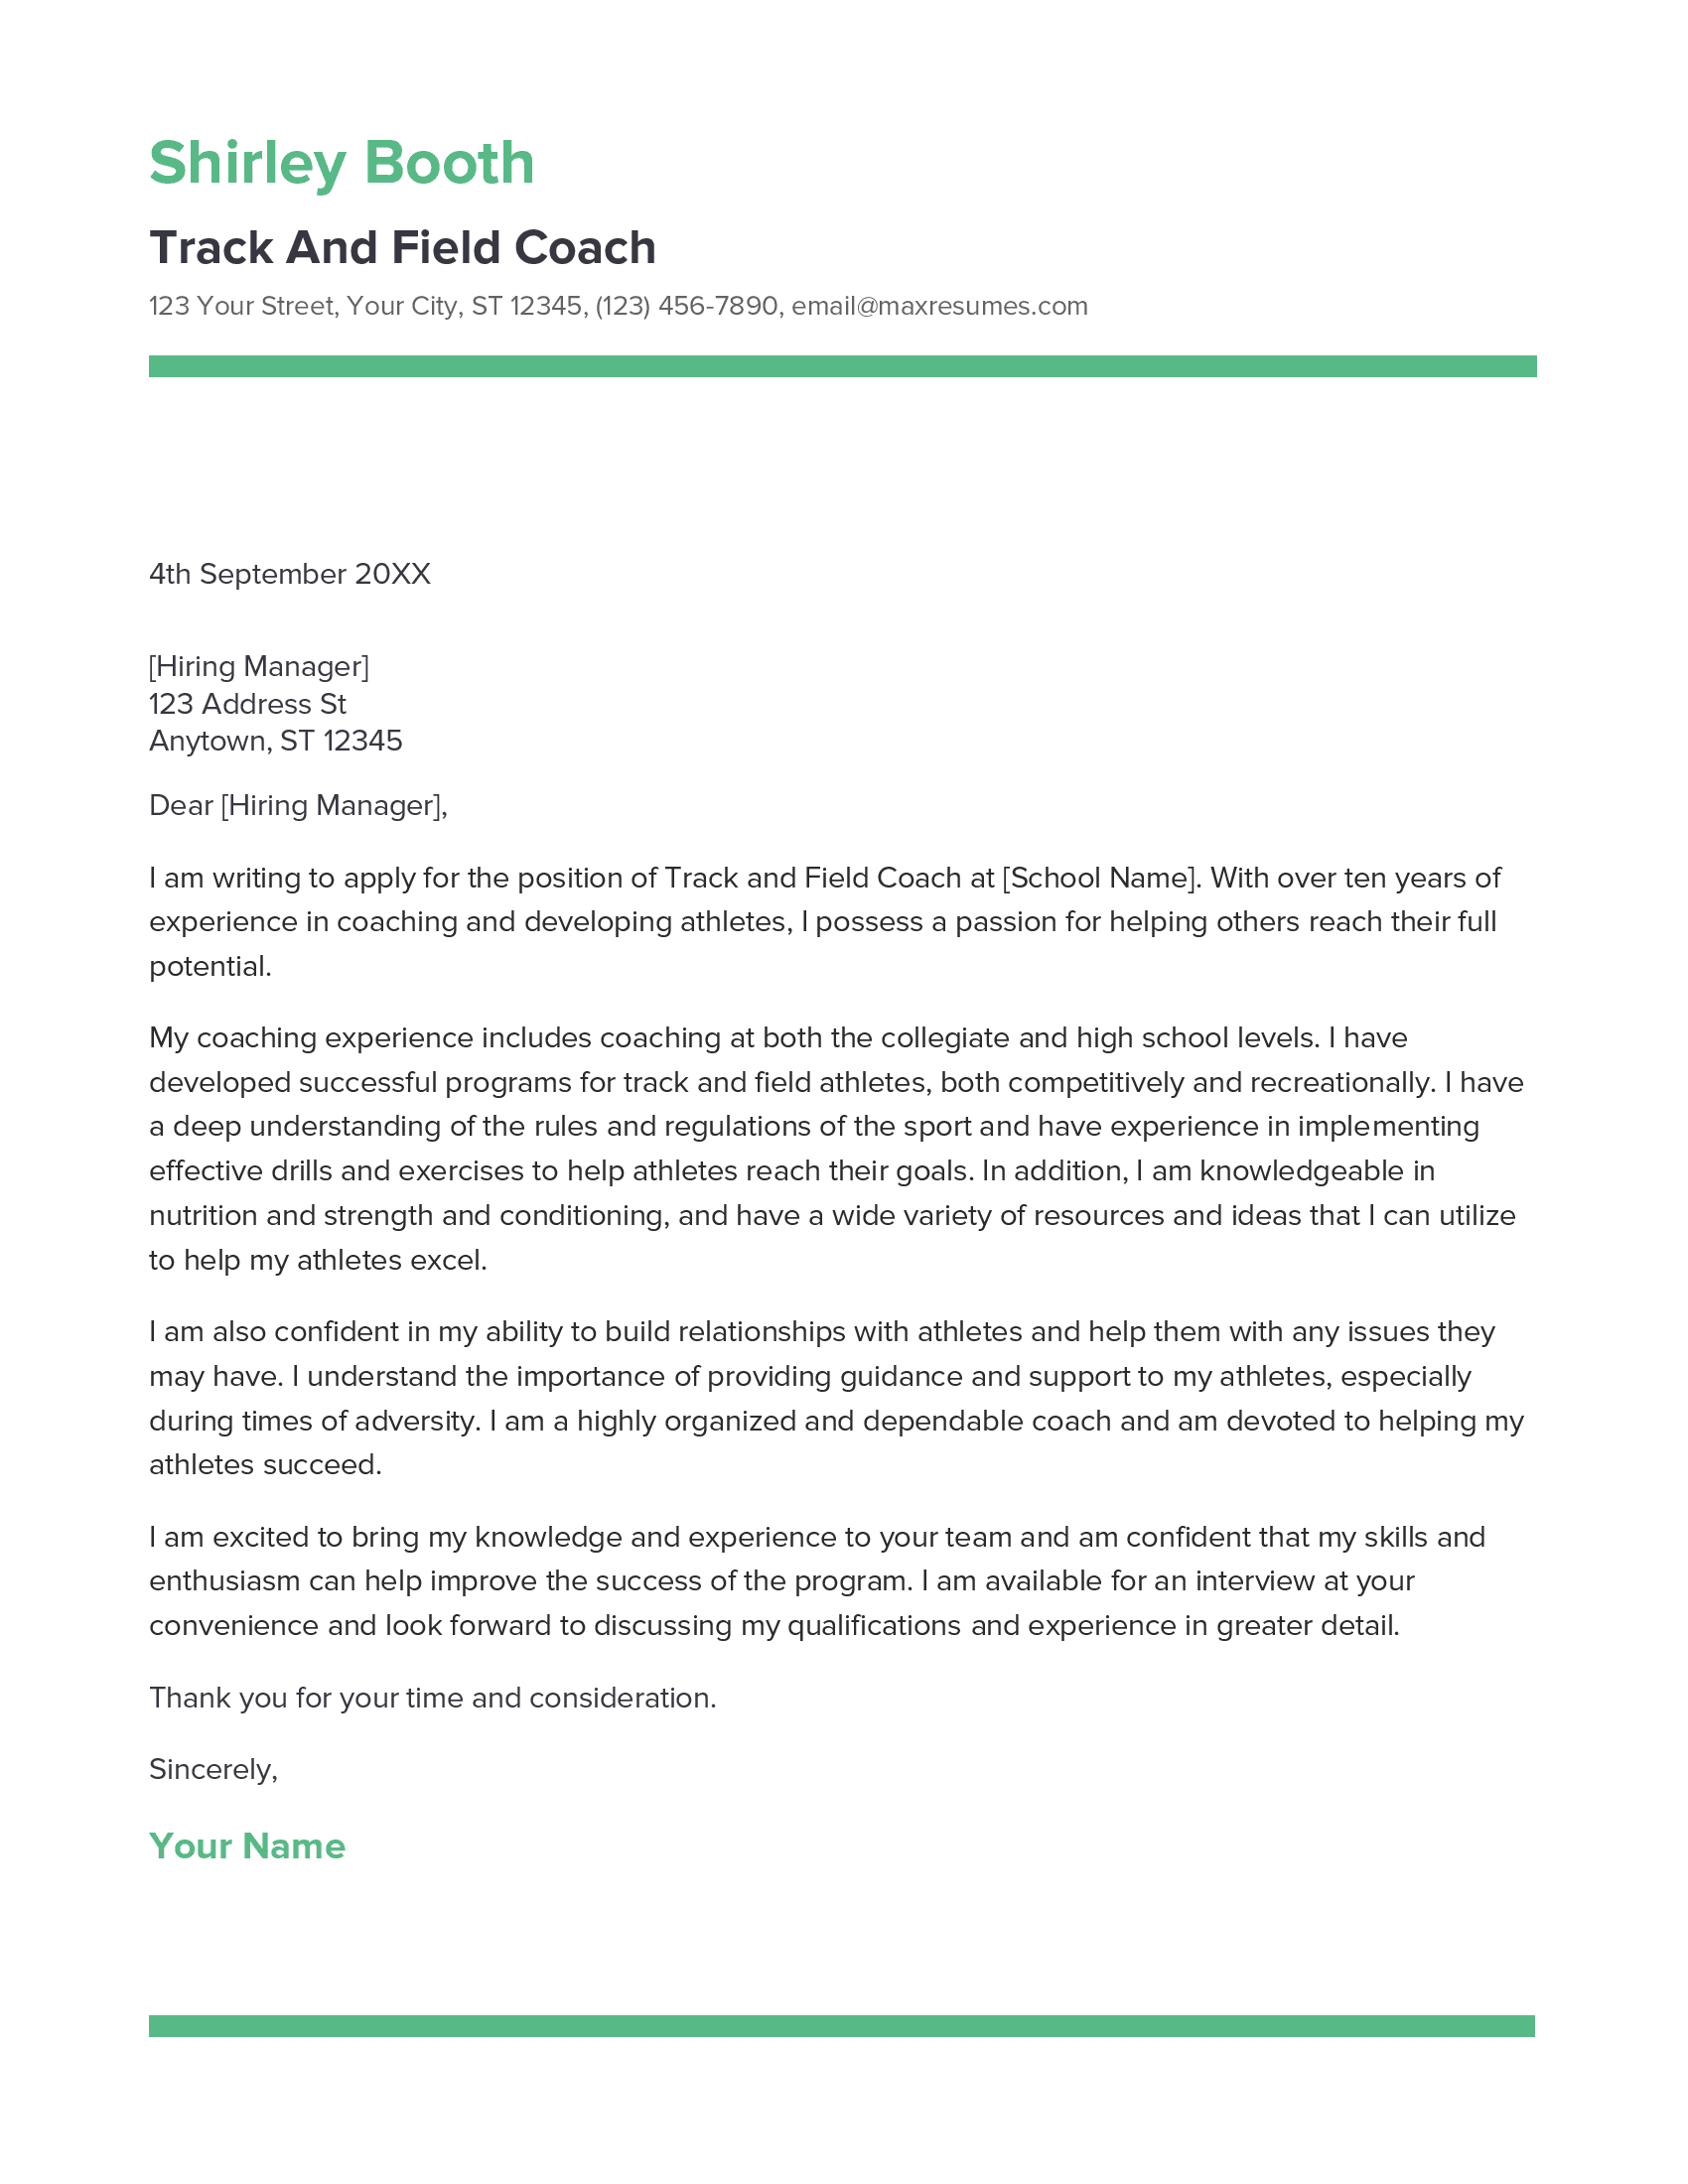 Track And Field Coach Cover Letter Example